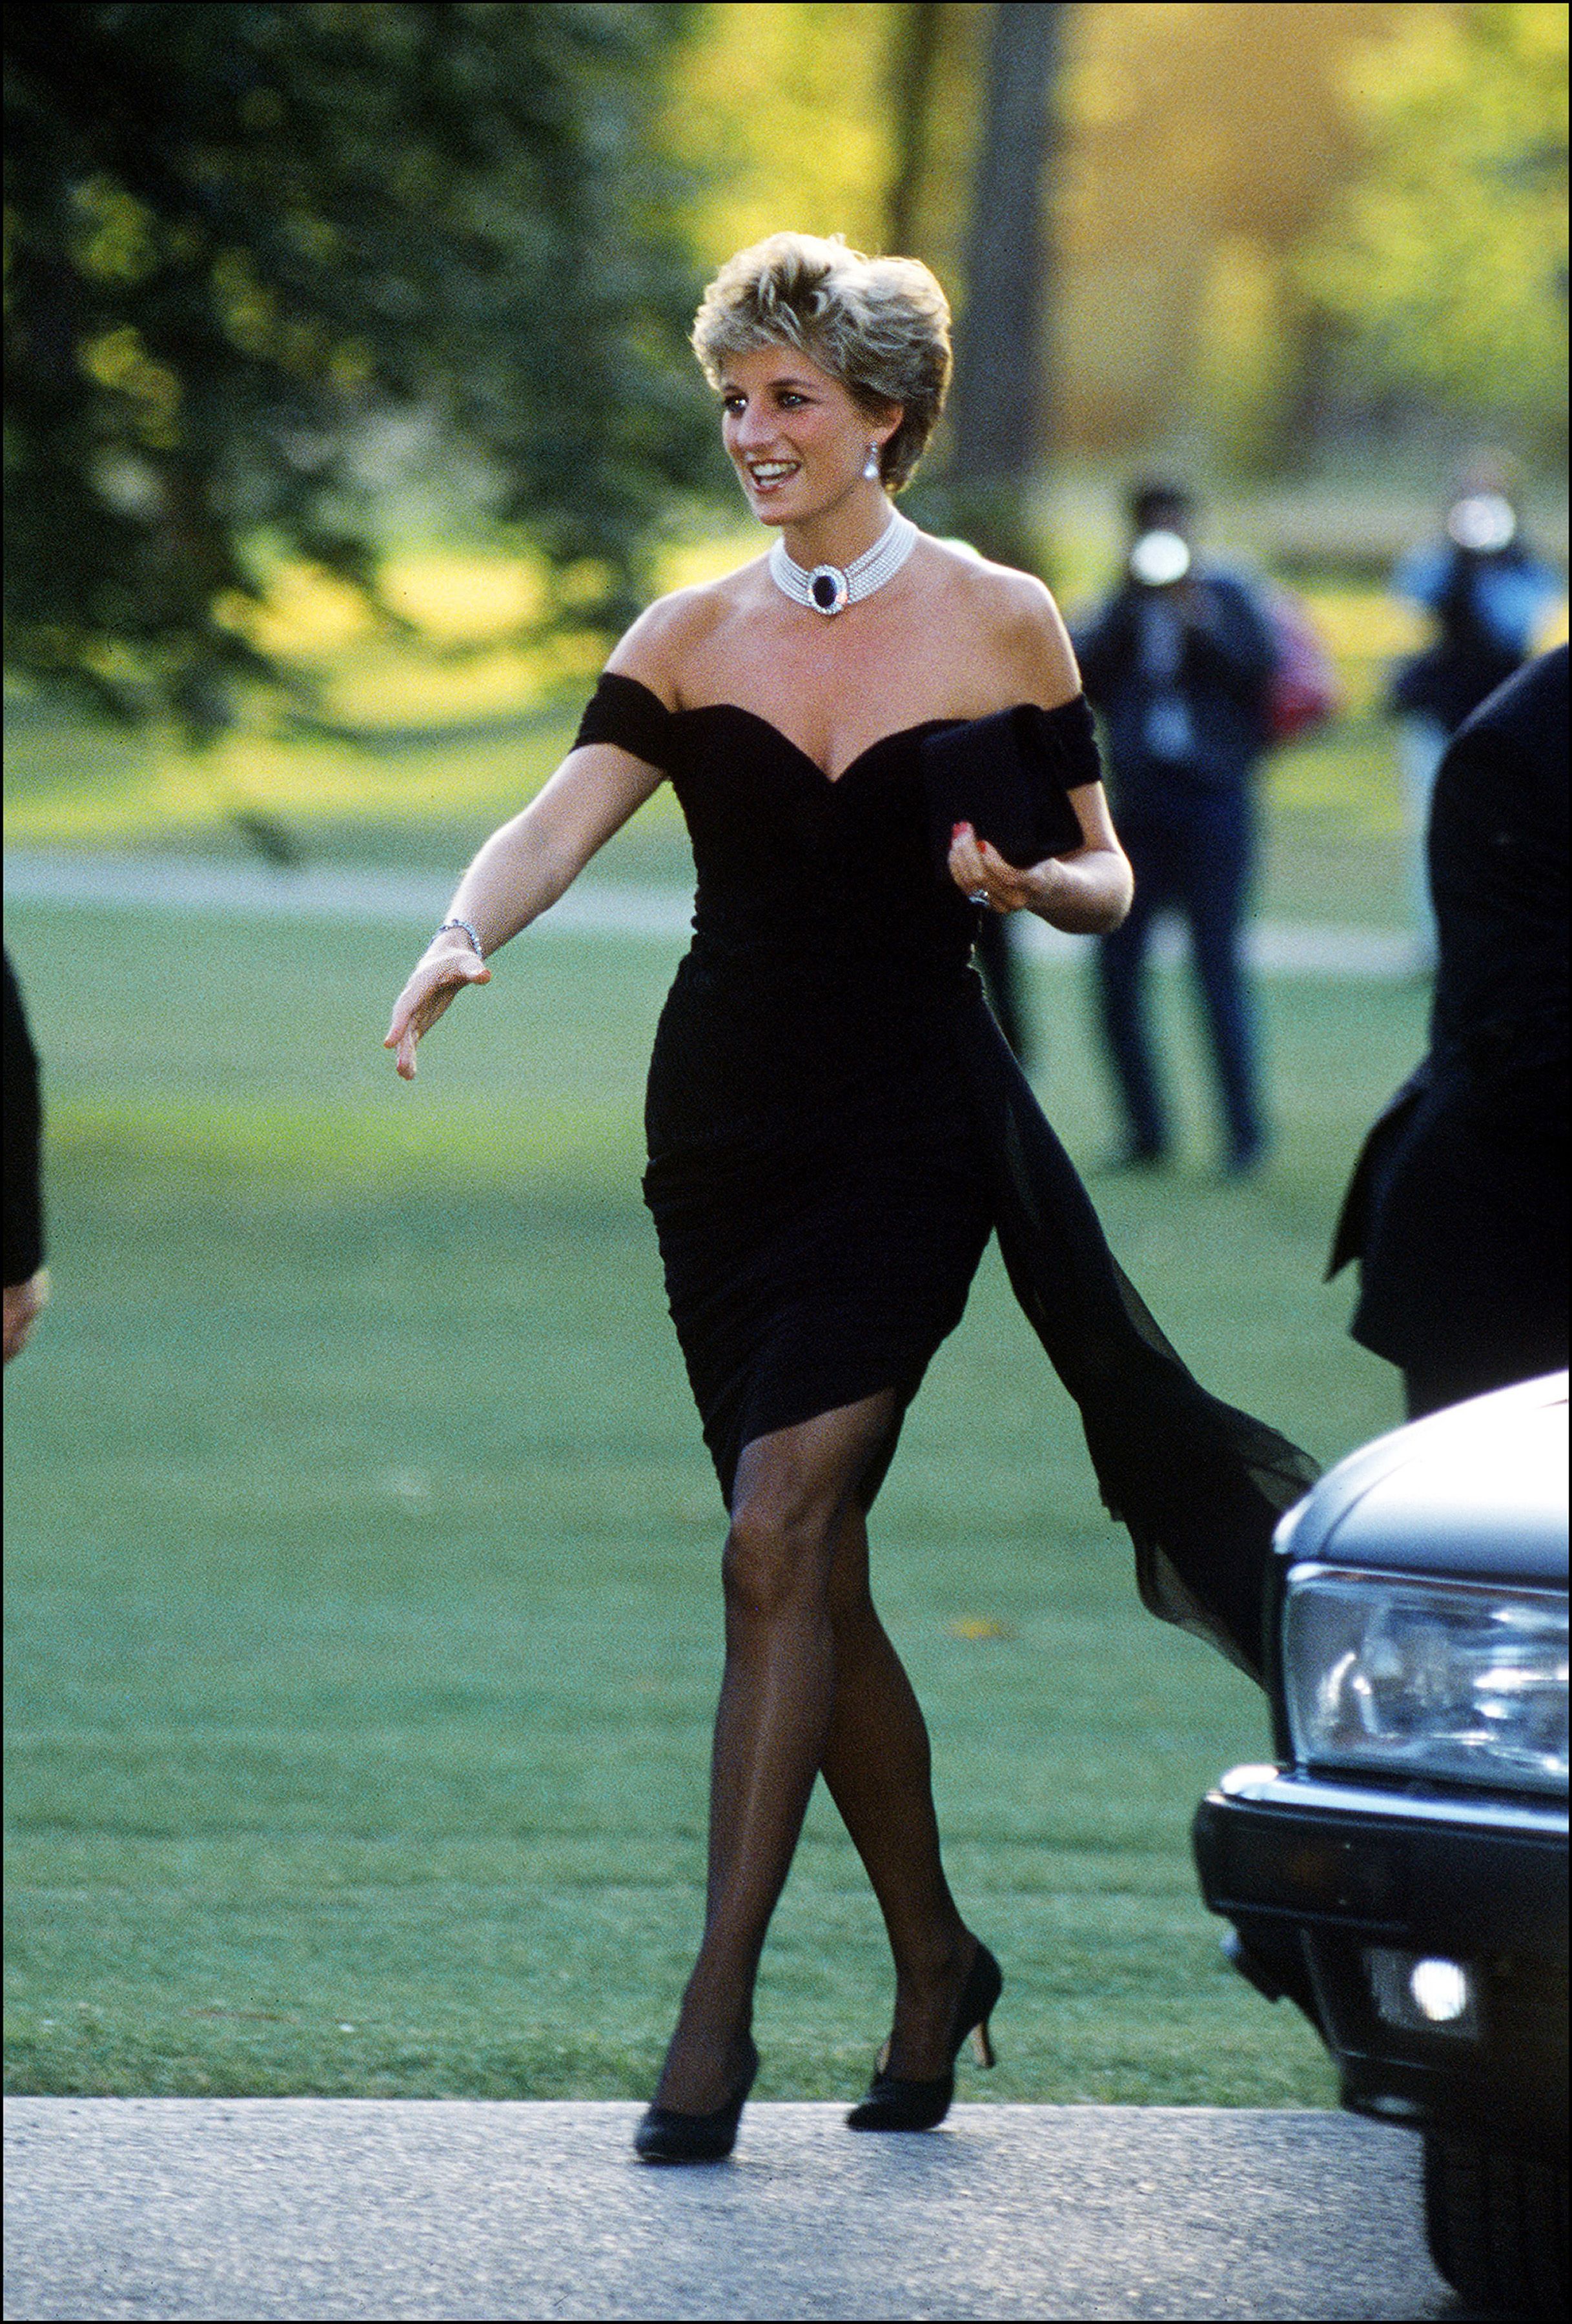 Minute by minute how a nation said farewell to Diana | Daily Mail Online